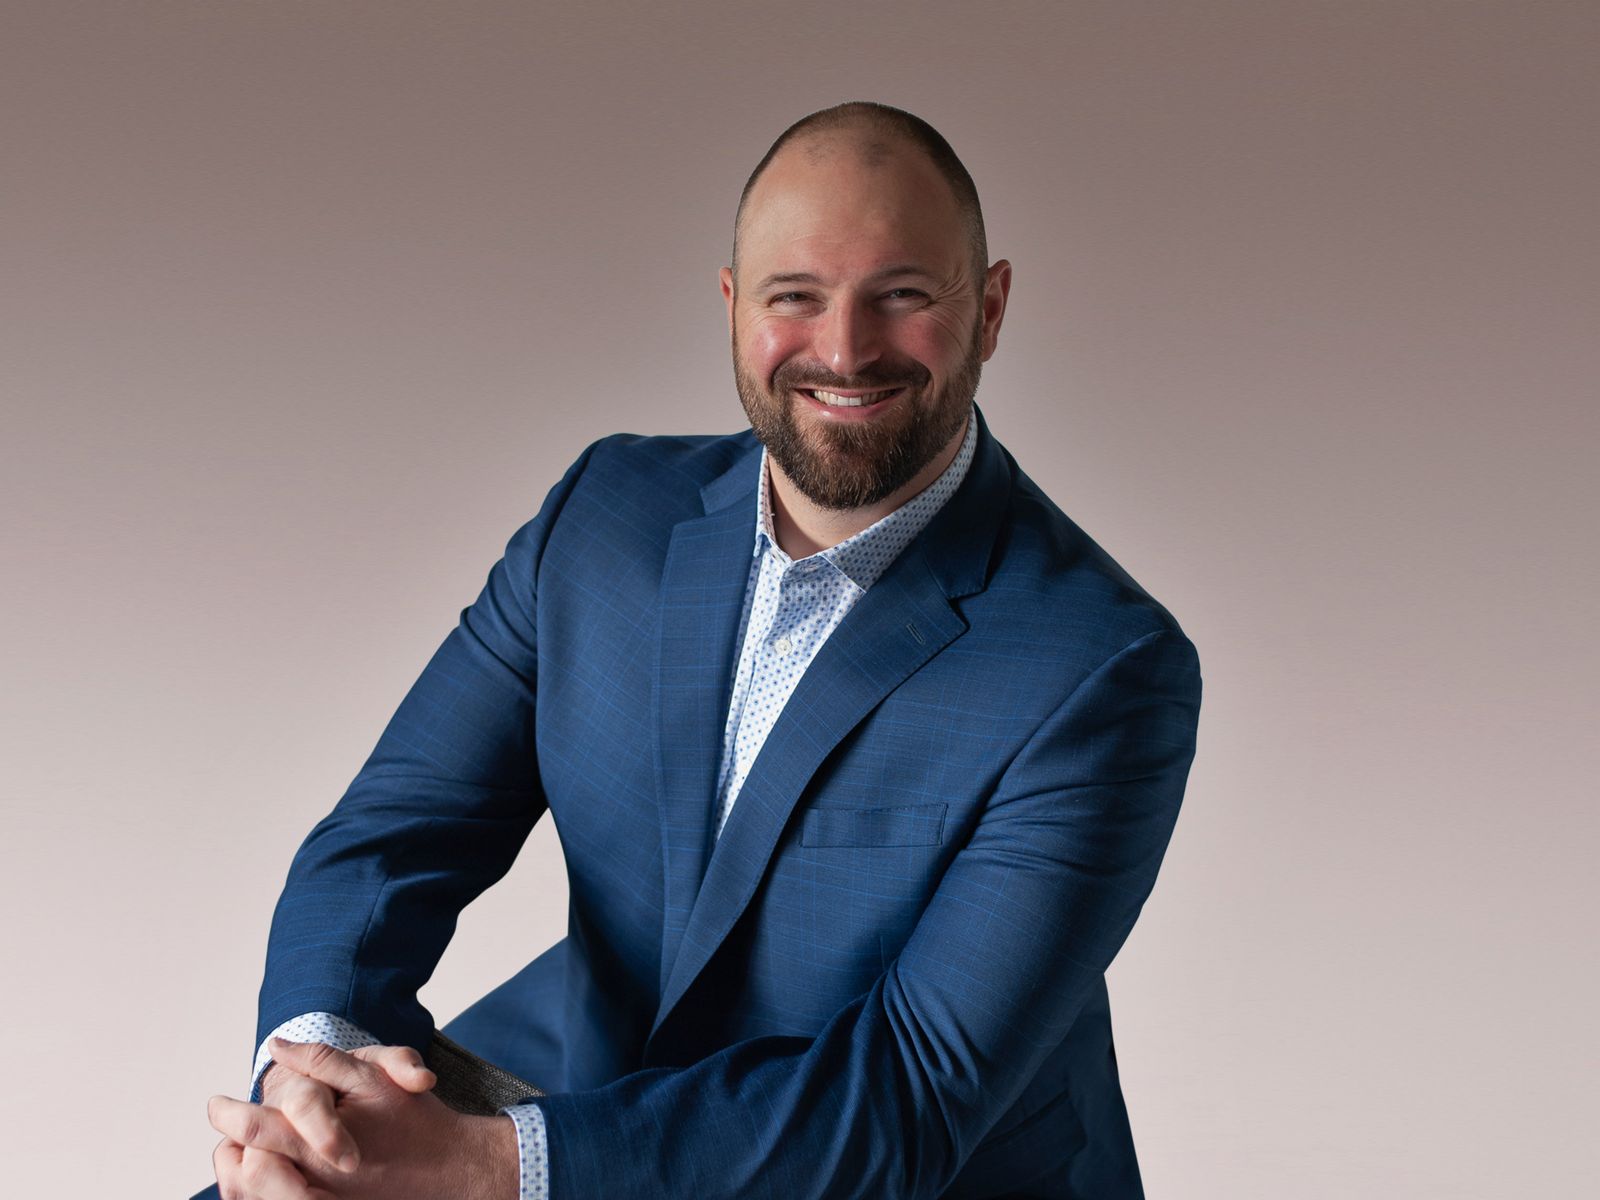 Welcome to 460 Realty, Josh Statham!